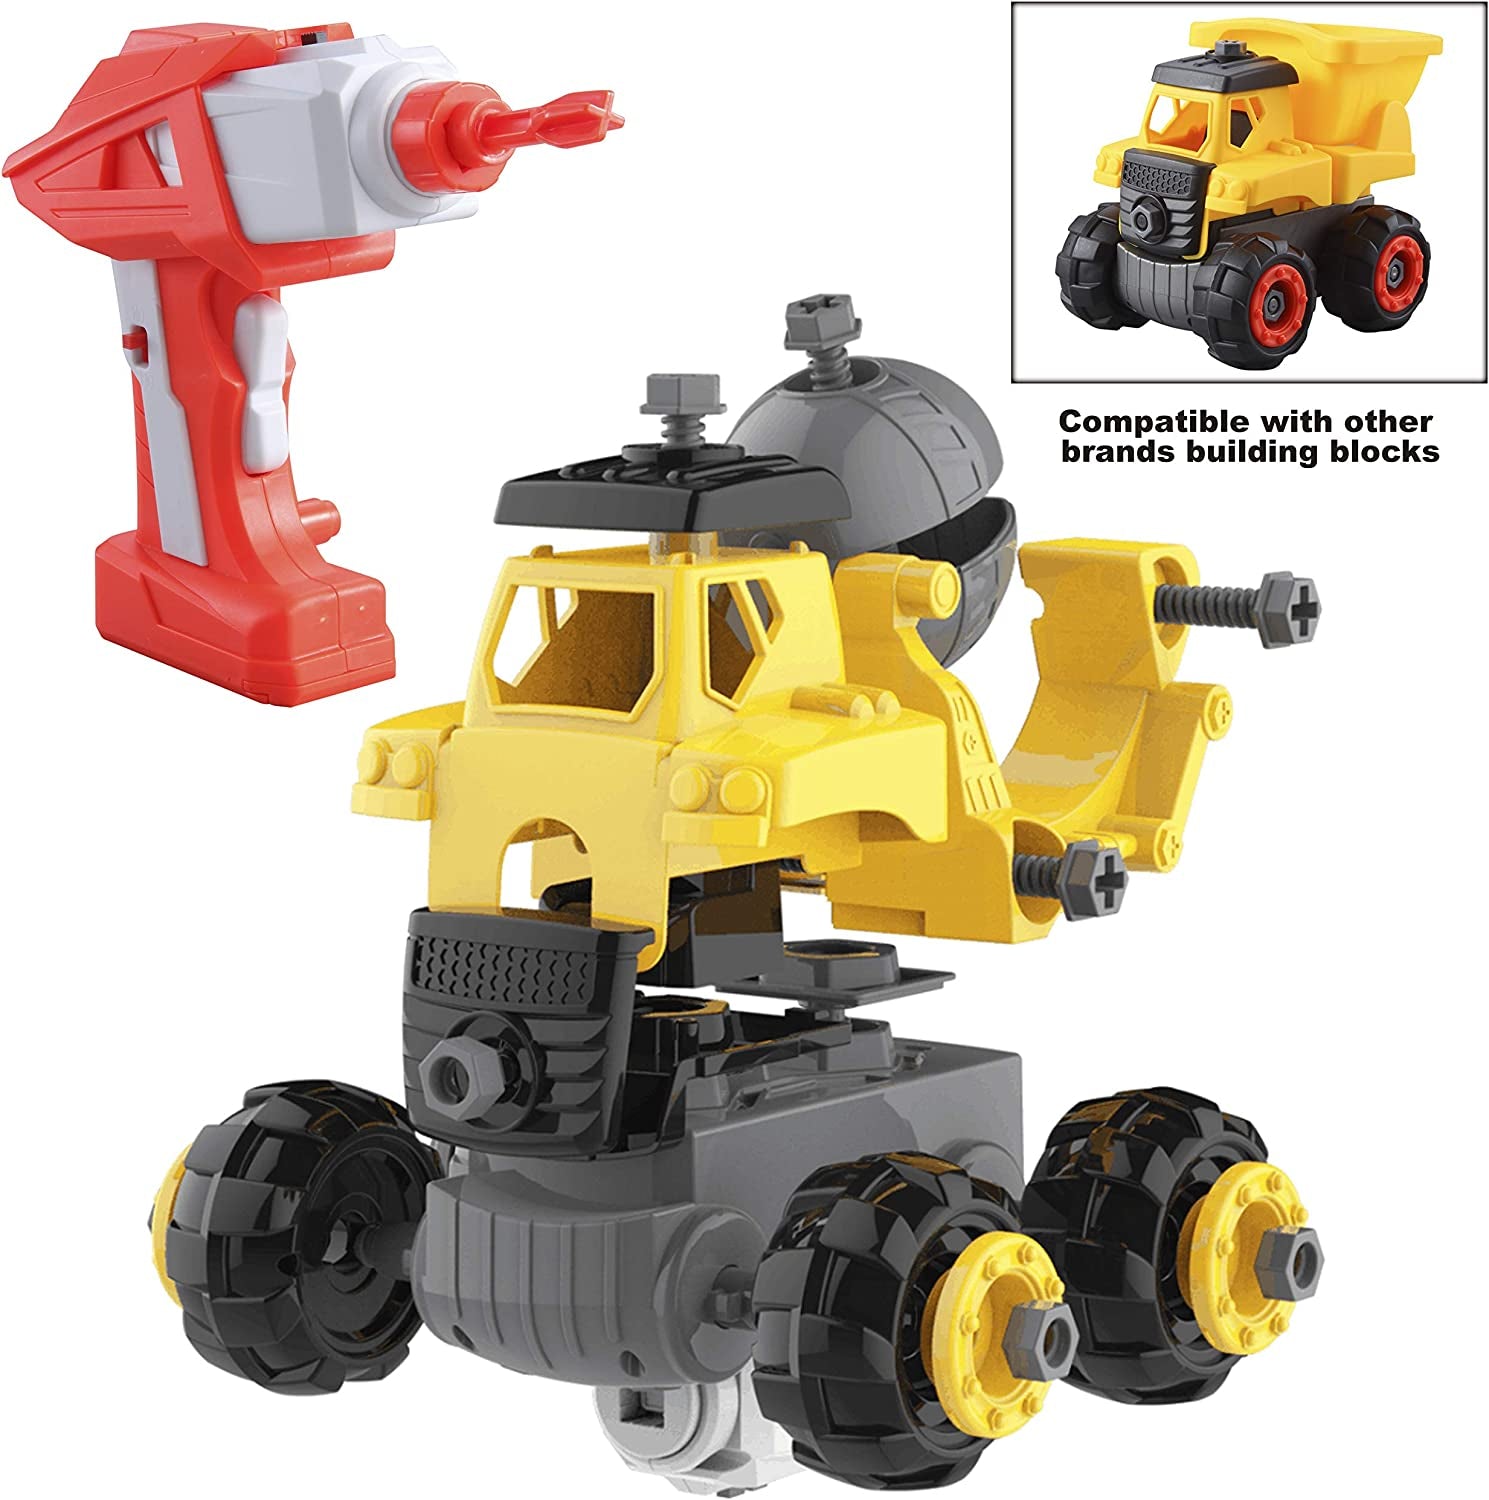 3 in 1 Take Apart RC Remote Control Truck Toy Combo Set and Remote Control Electric Drill, Including Fire Engine, Construction Truck, and Garbage Truck / Waste Management Recycling Truck